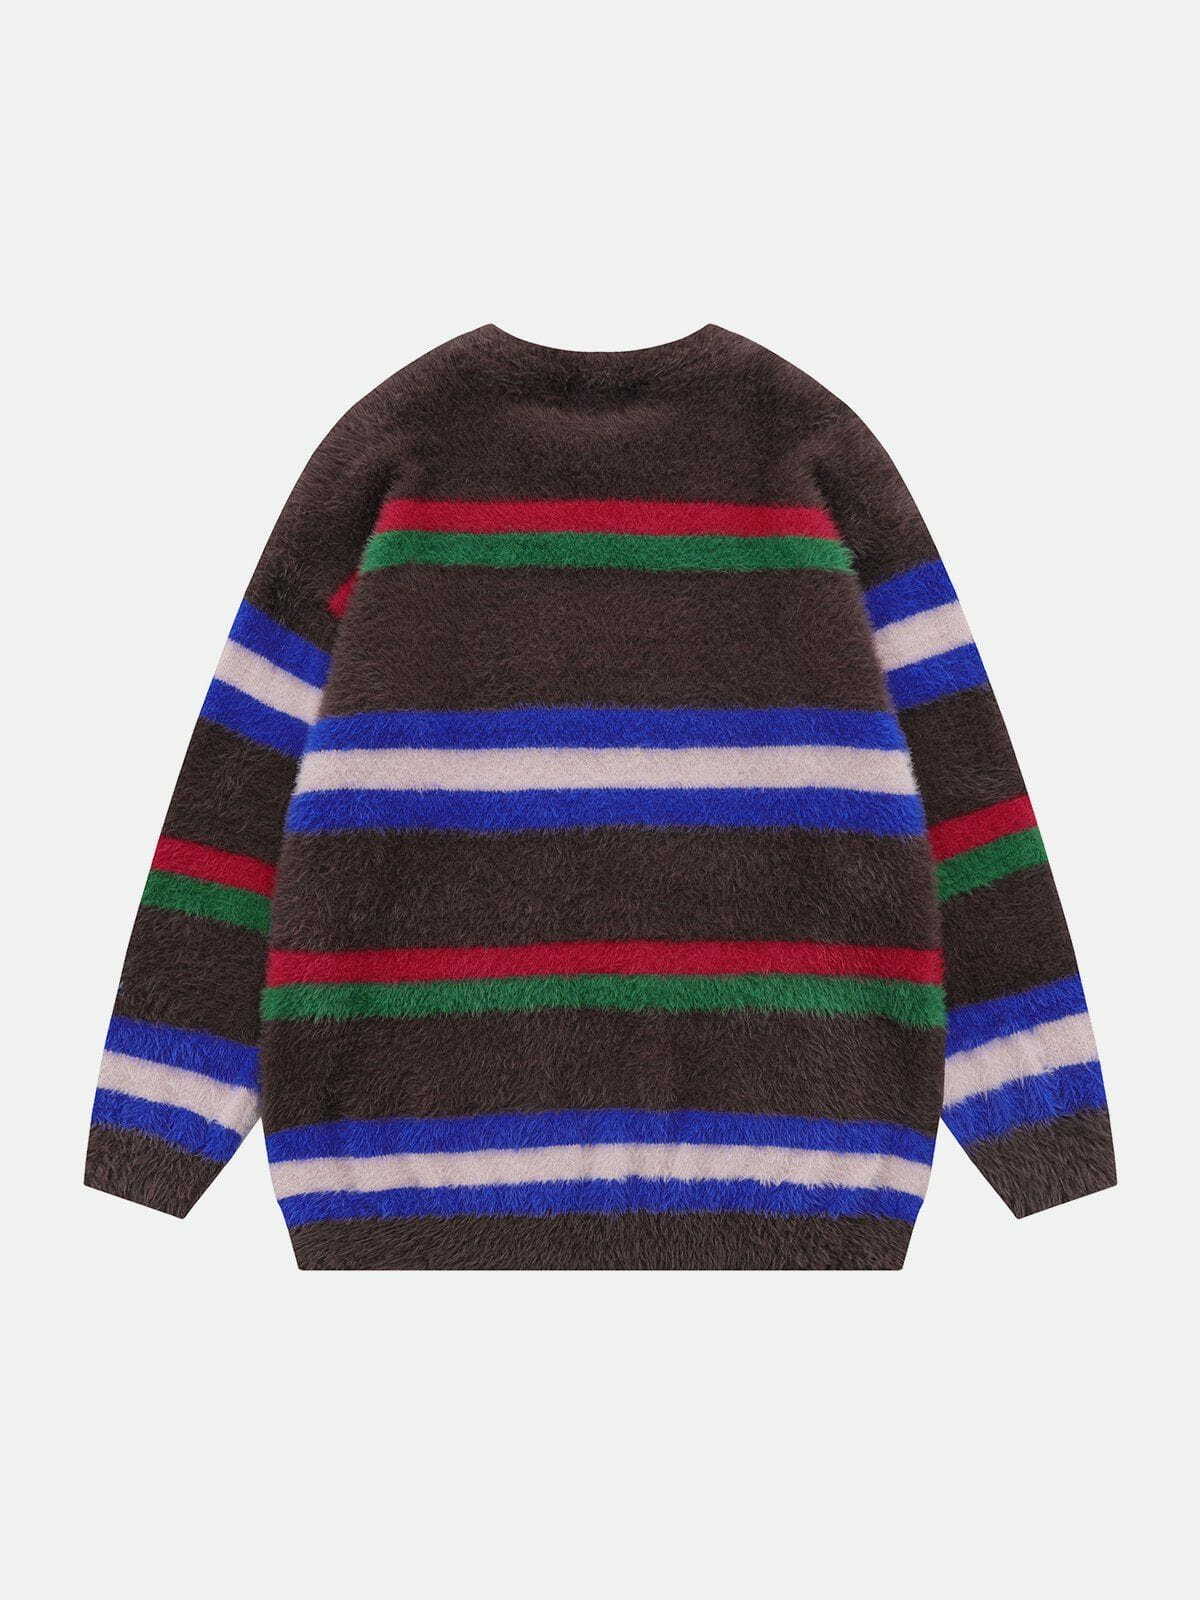 colorful striped letter sweater edgy retro streetwear statement 6899